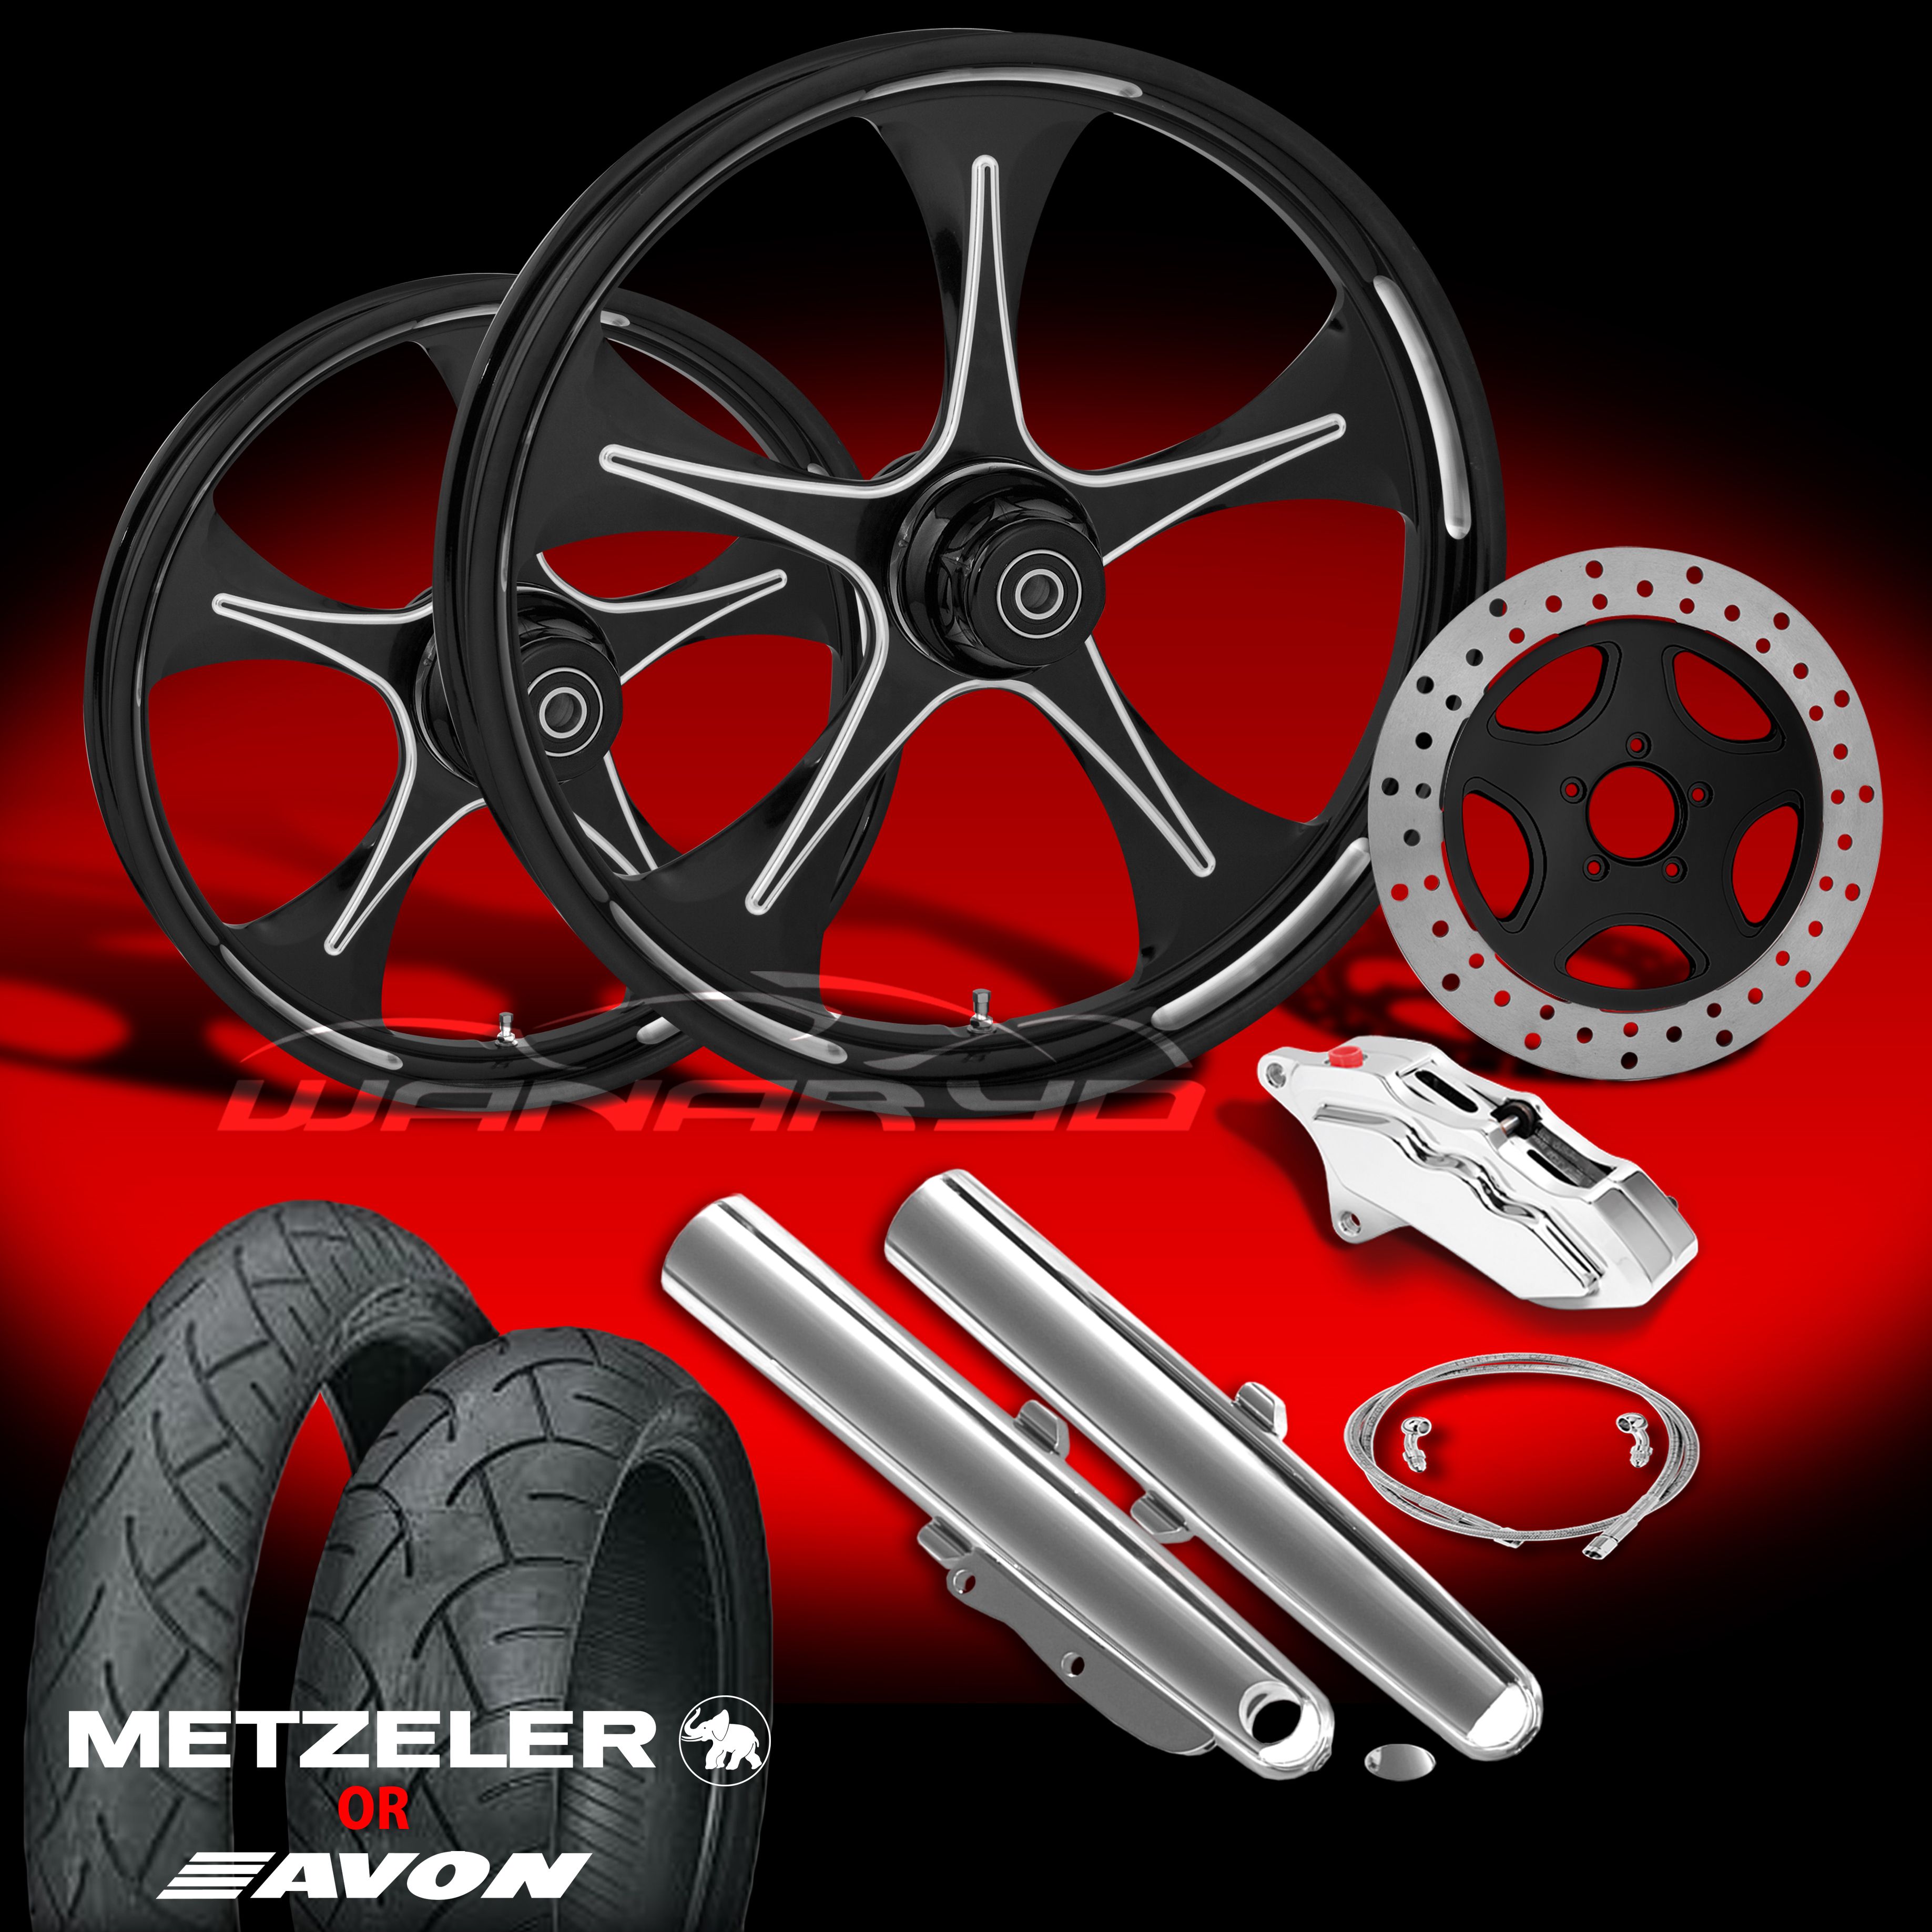 Stratos Eclipse 21 Wheels, Tires & Single Disk Kit for 2009 13 Harley